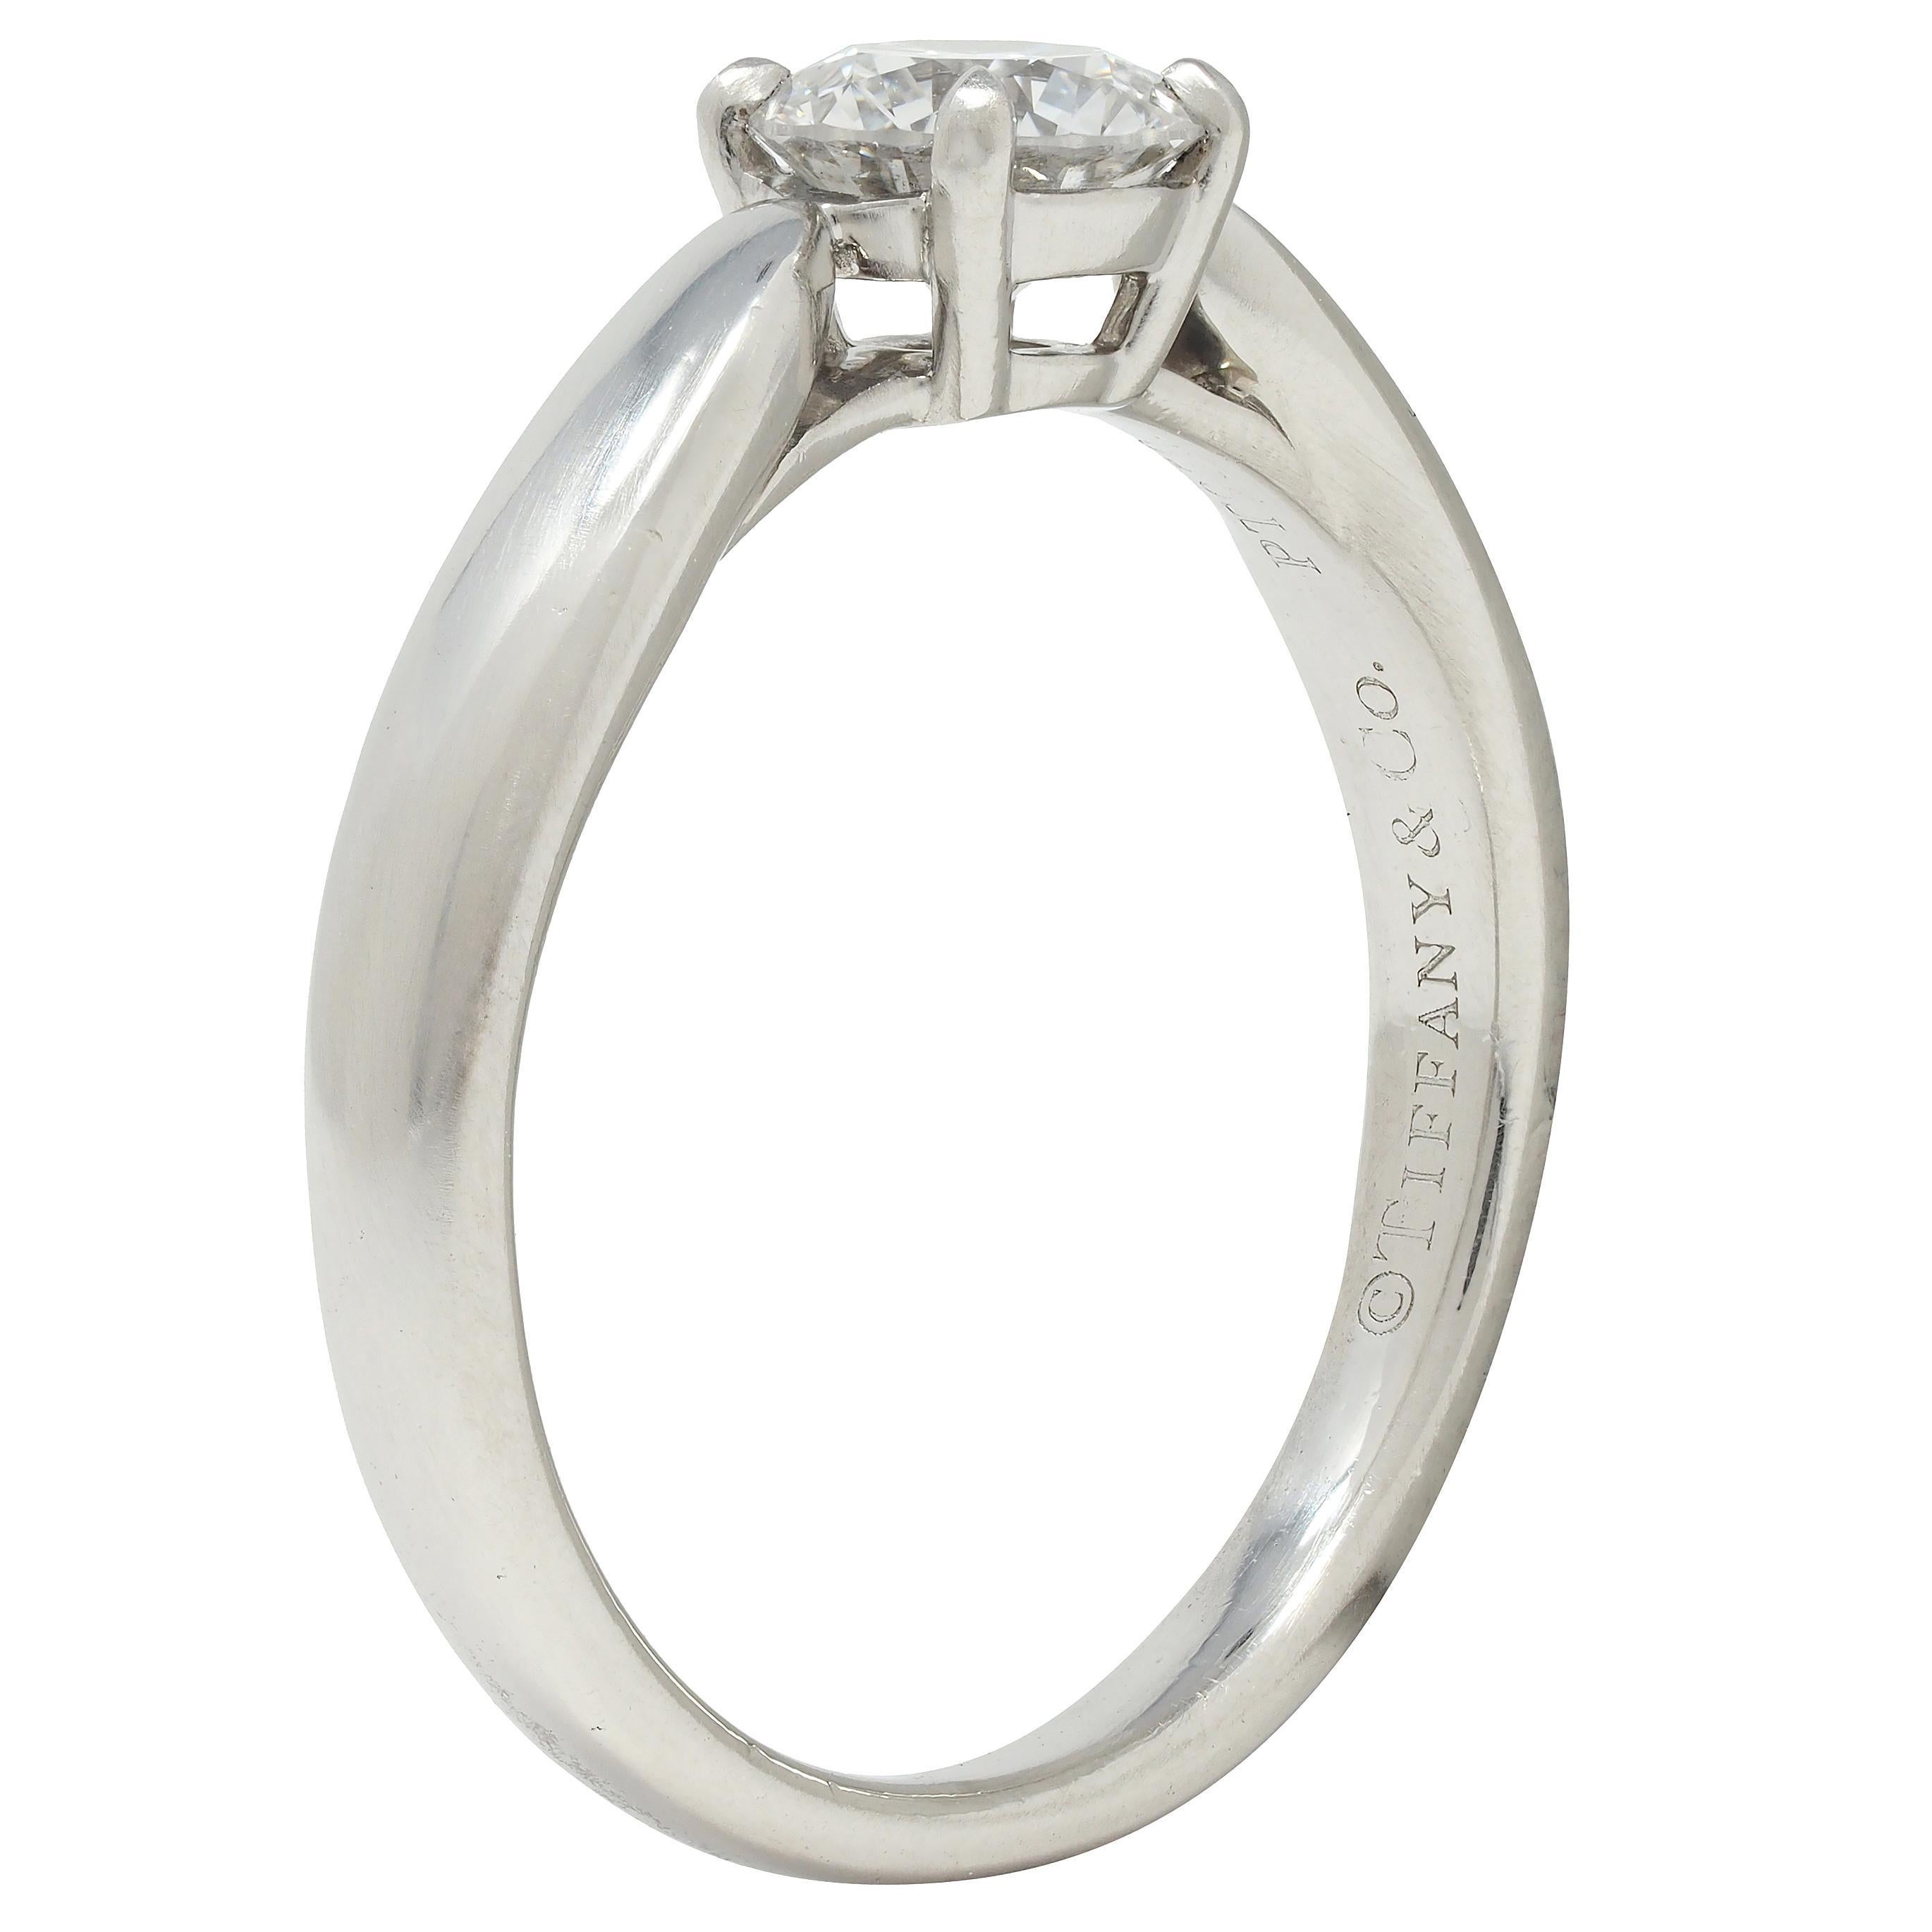 Centering a round brilliant cut diamond weighing 0.48 carat - F color with VVS1 clarity
Prong set in basket and flanked by tapered shoulders
With high polish finish and inscribed with carat weight
Stamped for platinum 
Numbered and fully signed for